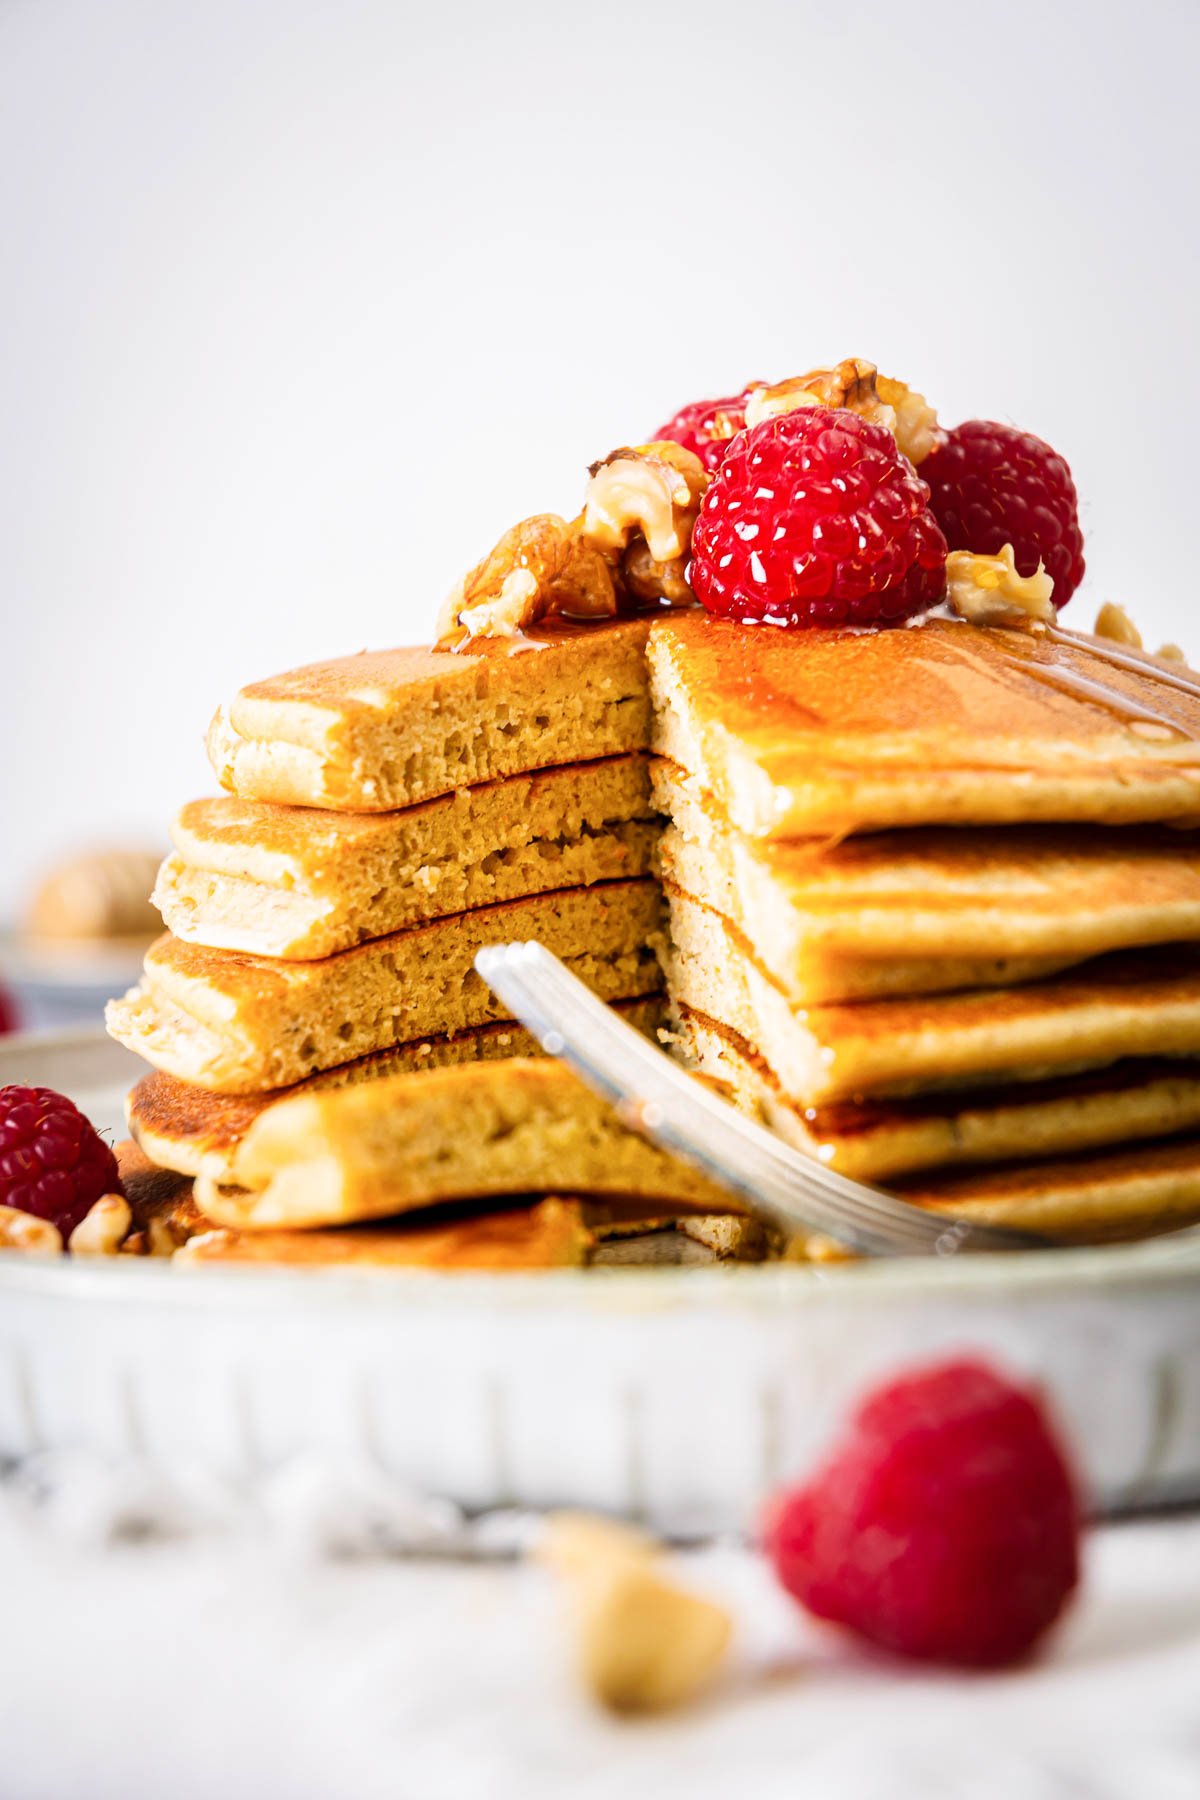 A stack of pancakes cut in and showing texture.